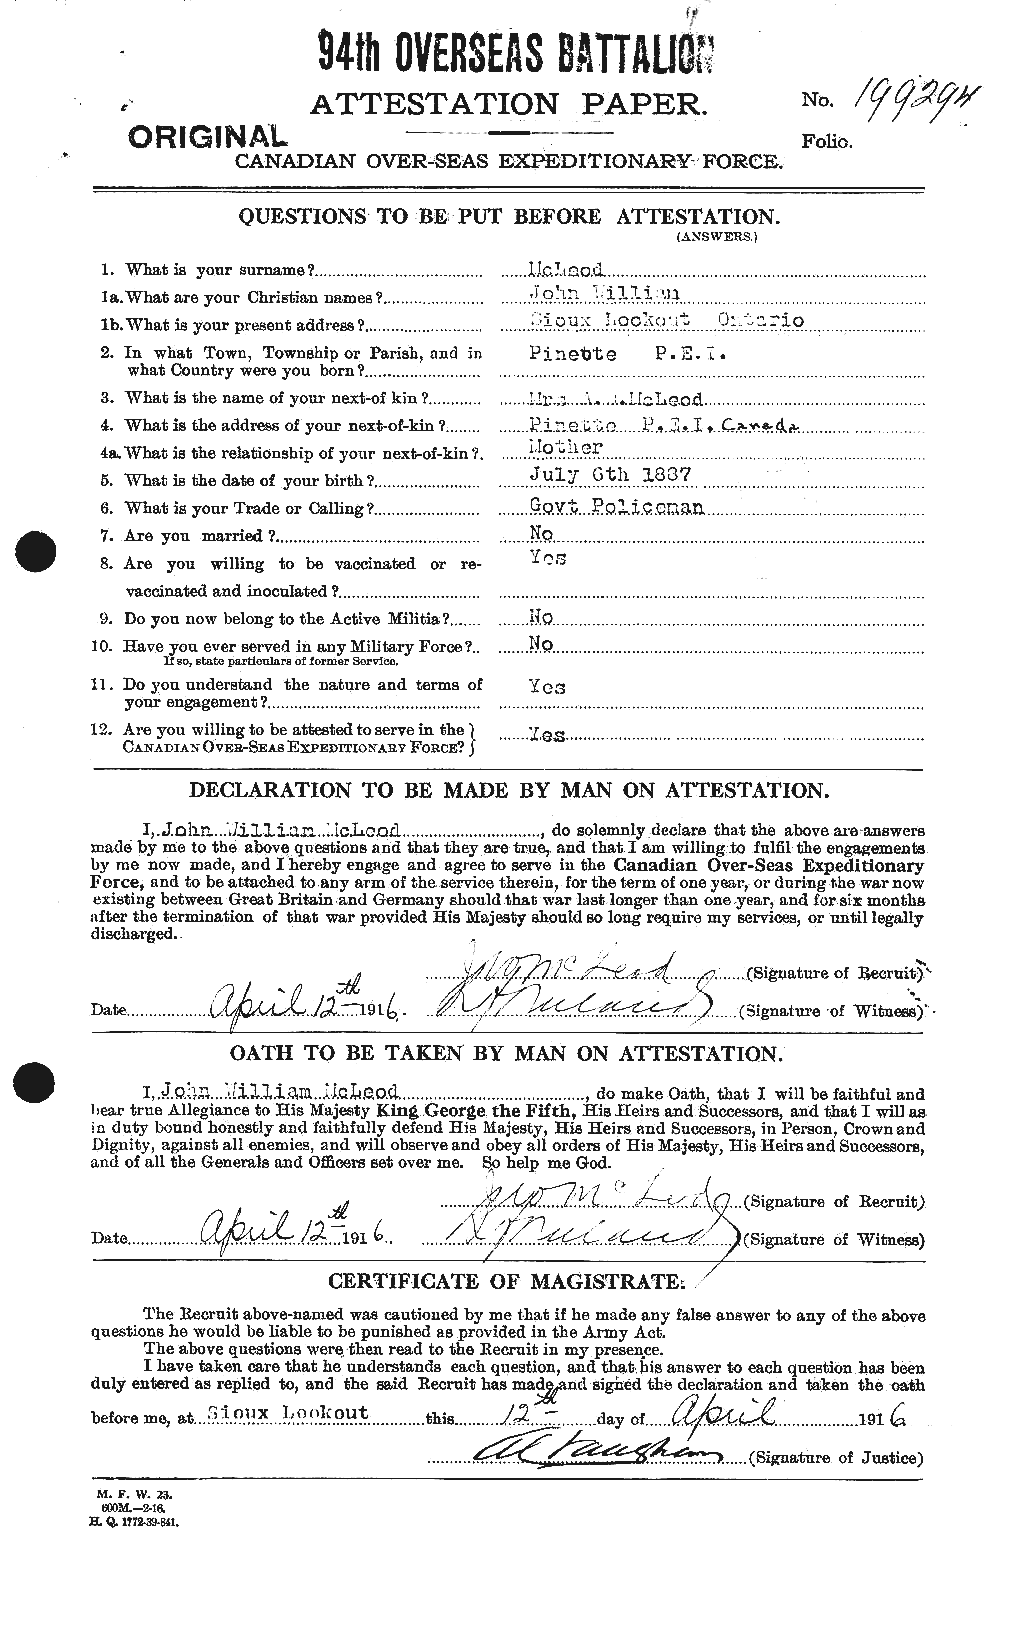 Personnel Records of the First World War - CEF 535070a